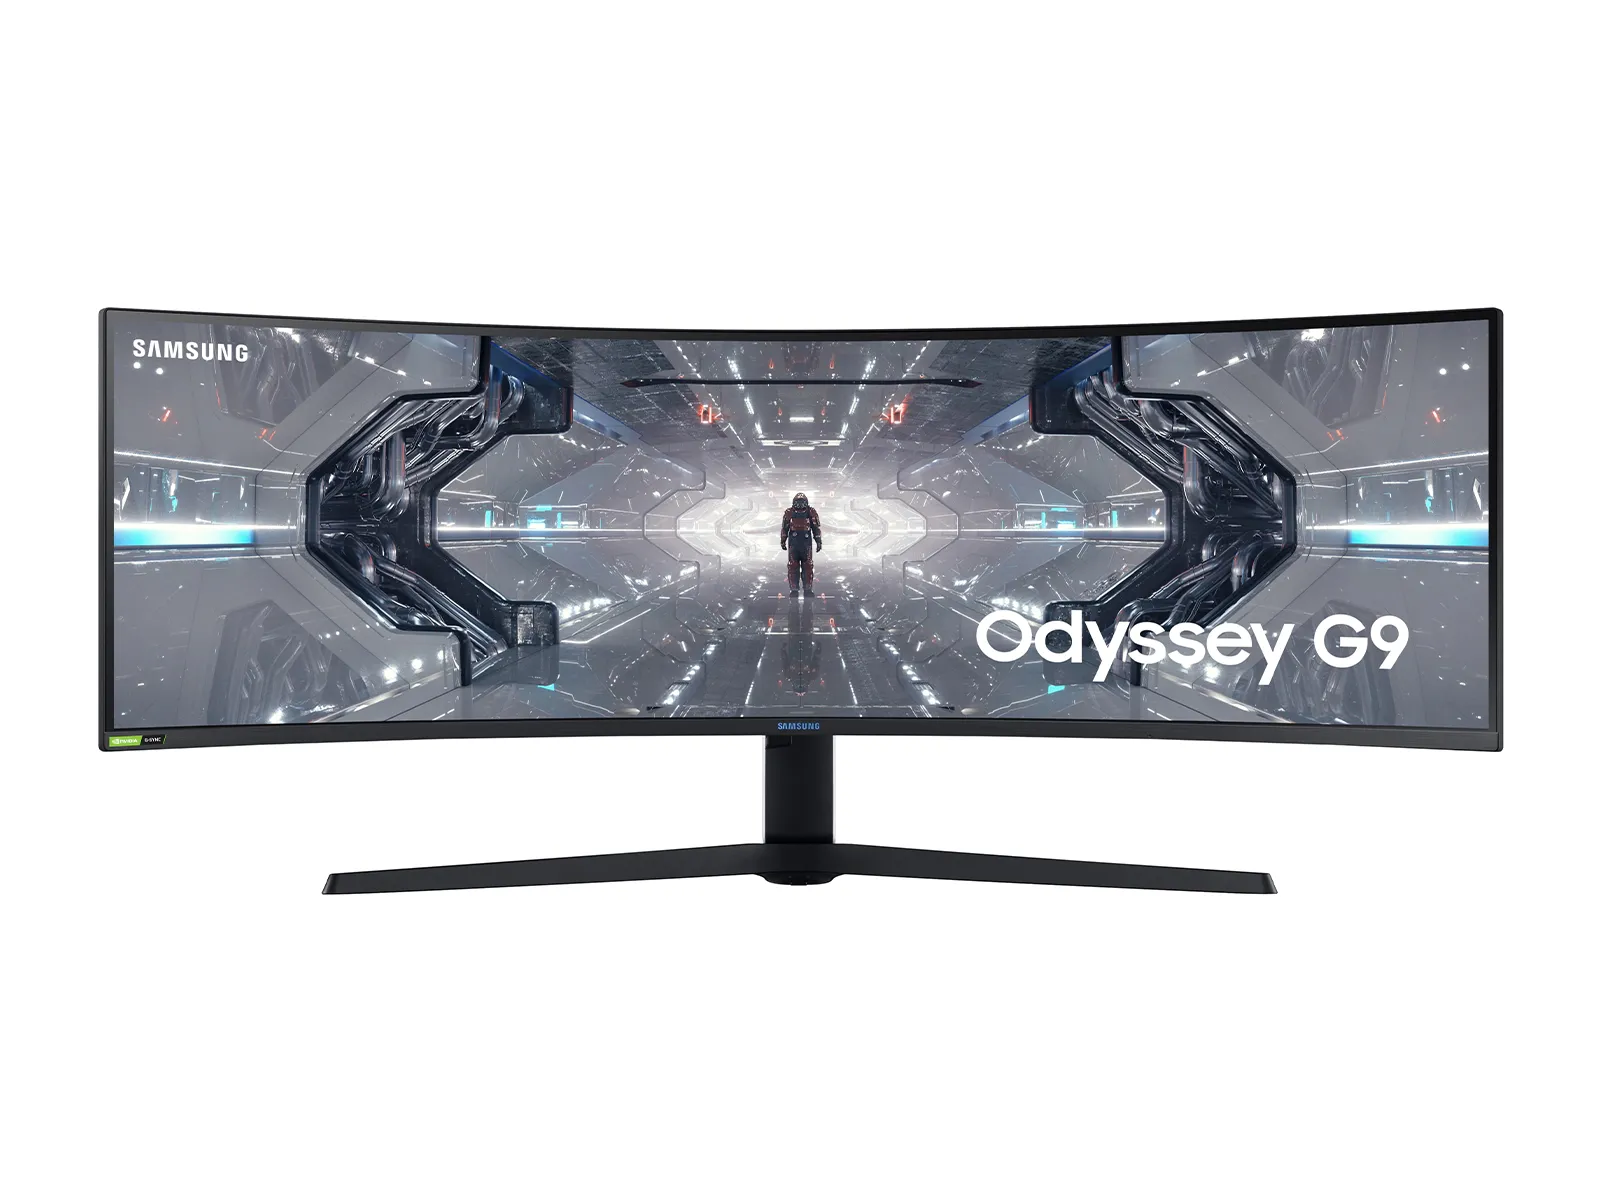 The Samsung Odyssey is an incredible gaming monitor that is the size of two screens side by side.  It has an ultra-wide Quad HD resolution, a 240Hz refresh rate and HDR 1000 support.